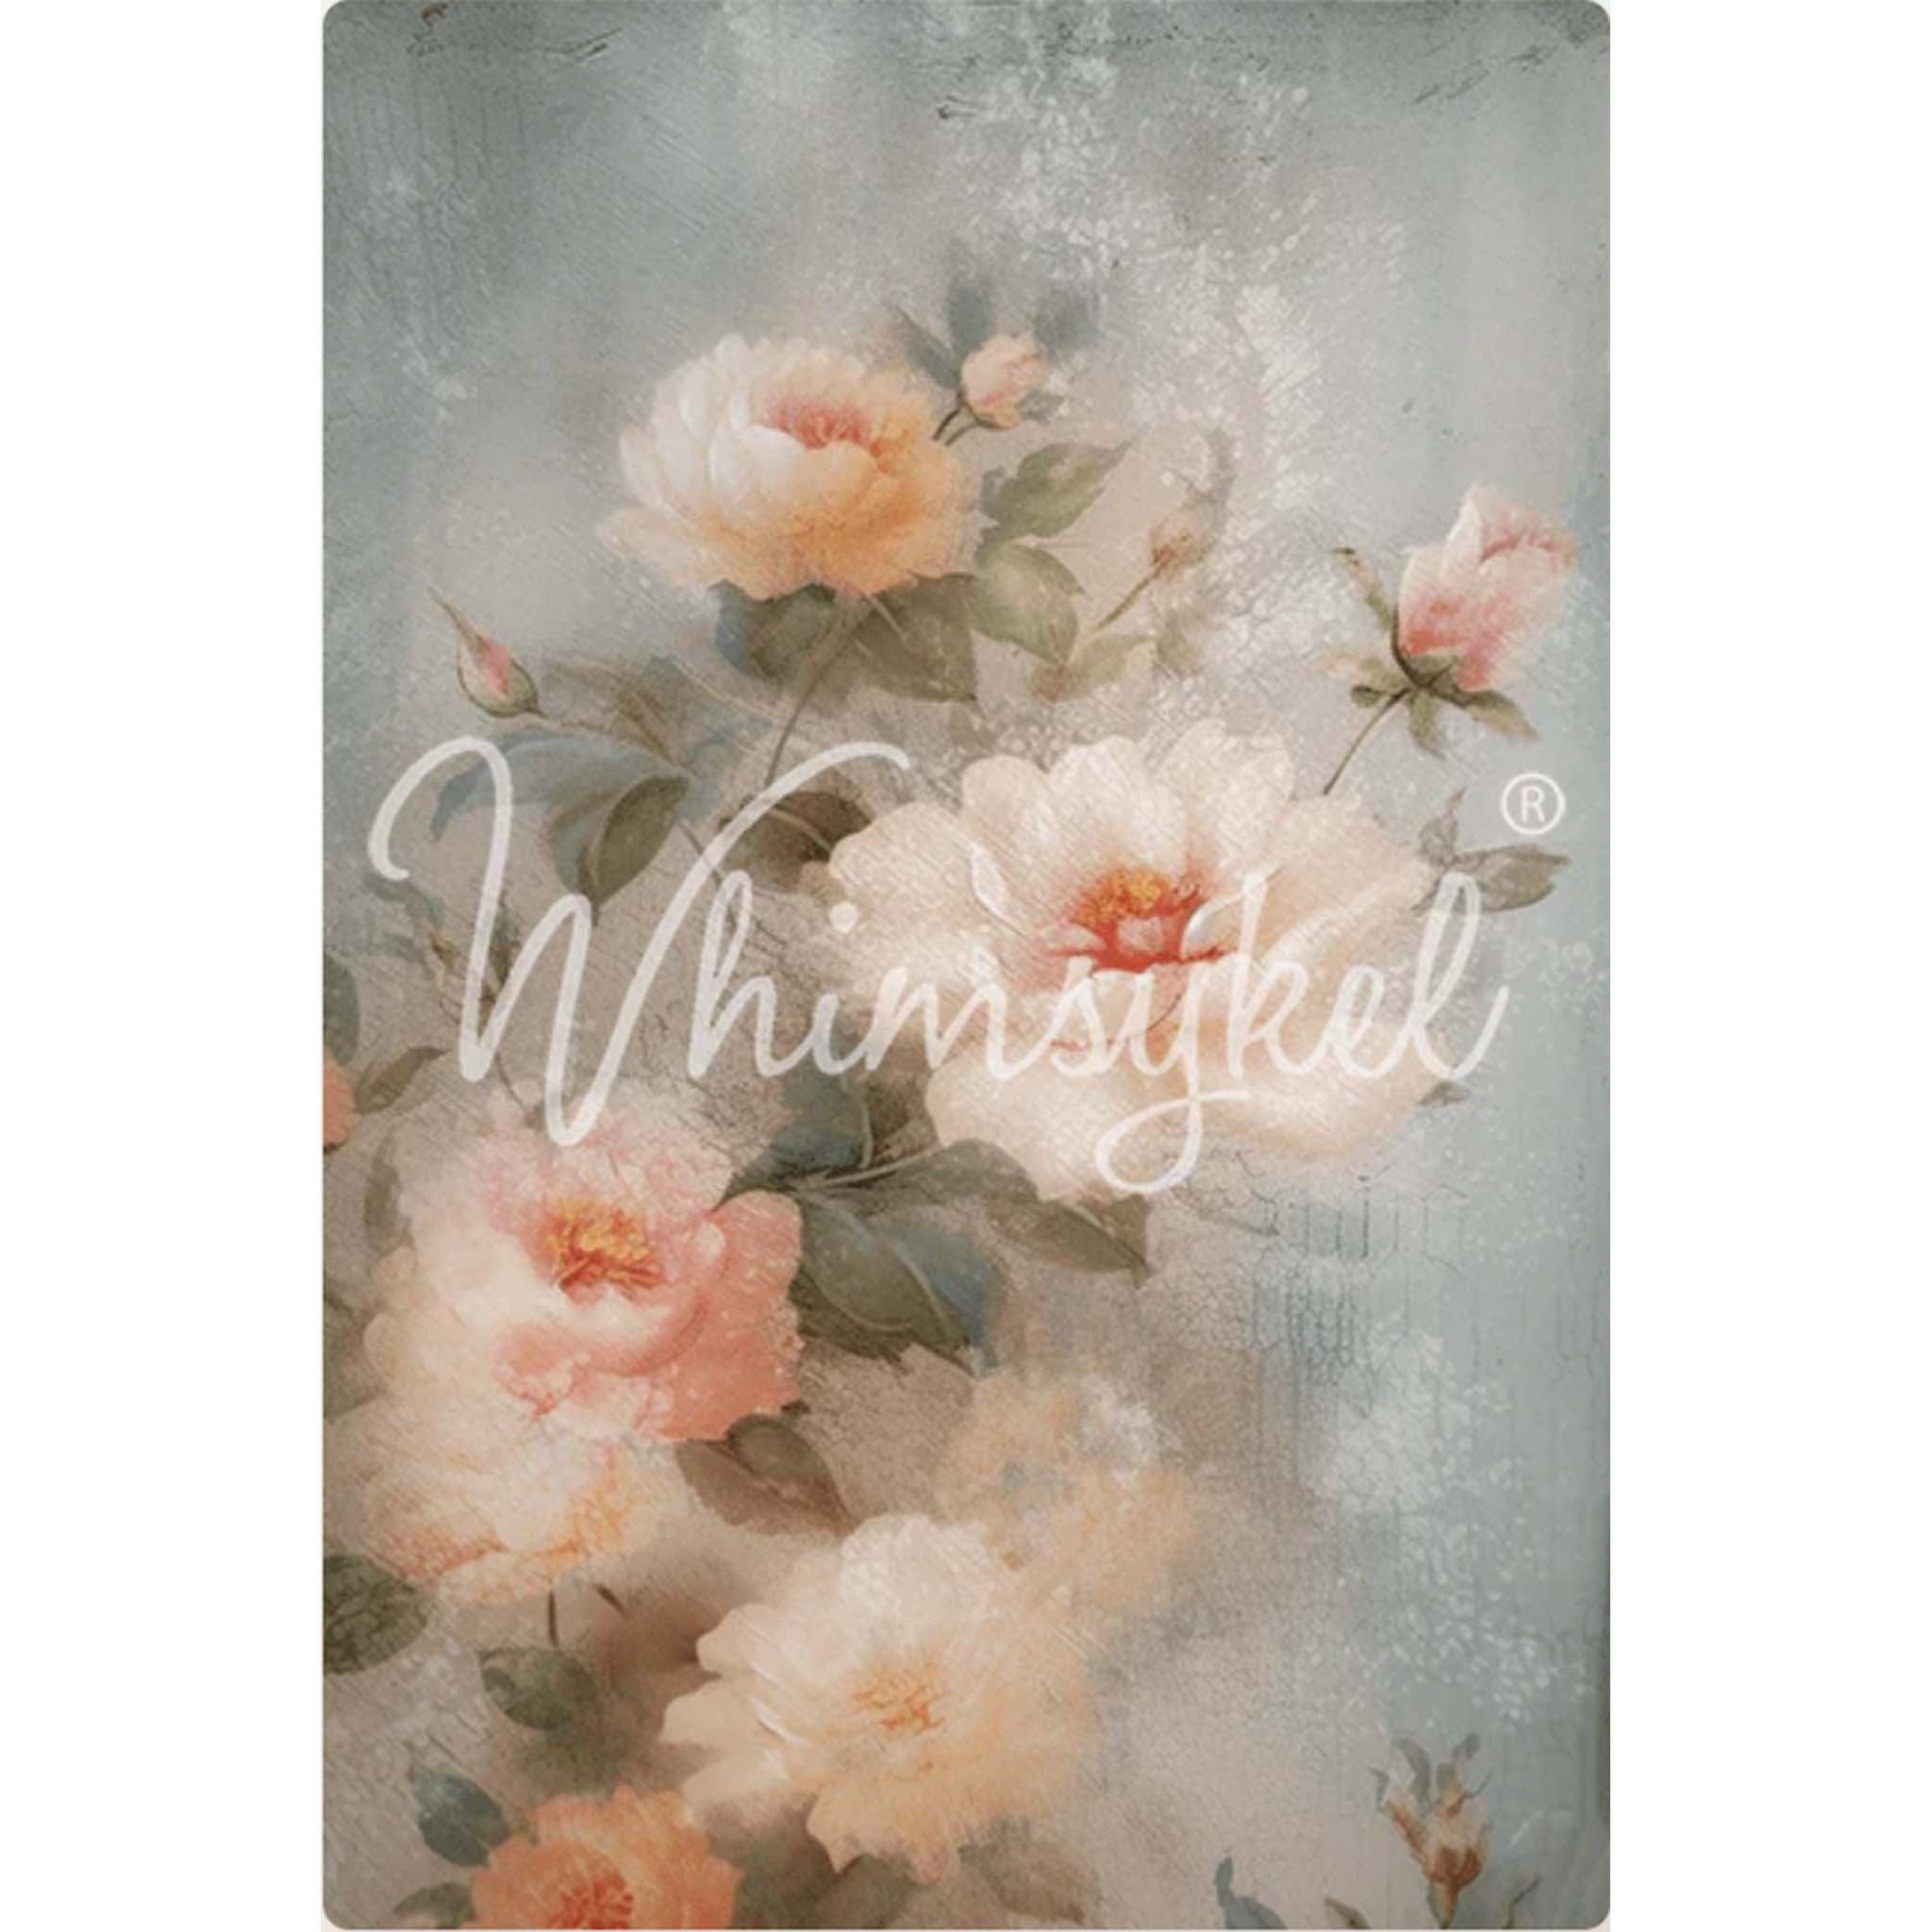 Tissue paper design that features a beautifully aged painting of roses in soft, muted colors against a grey background. White borders are on the sides.